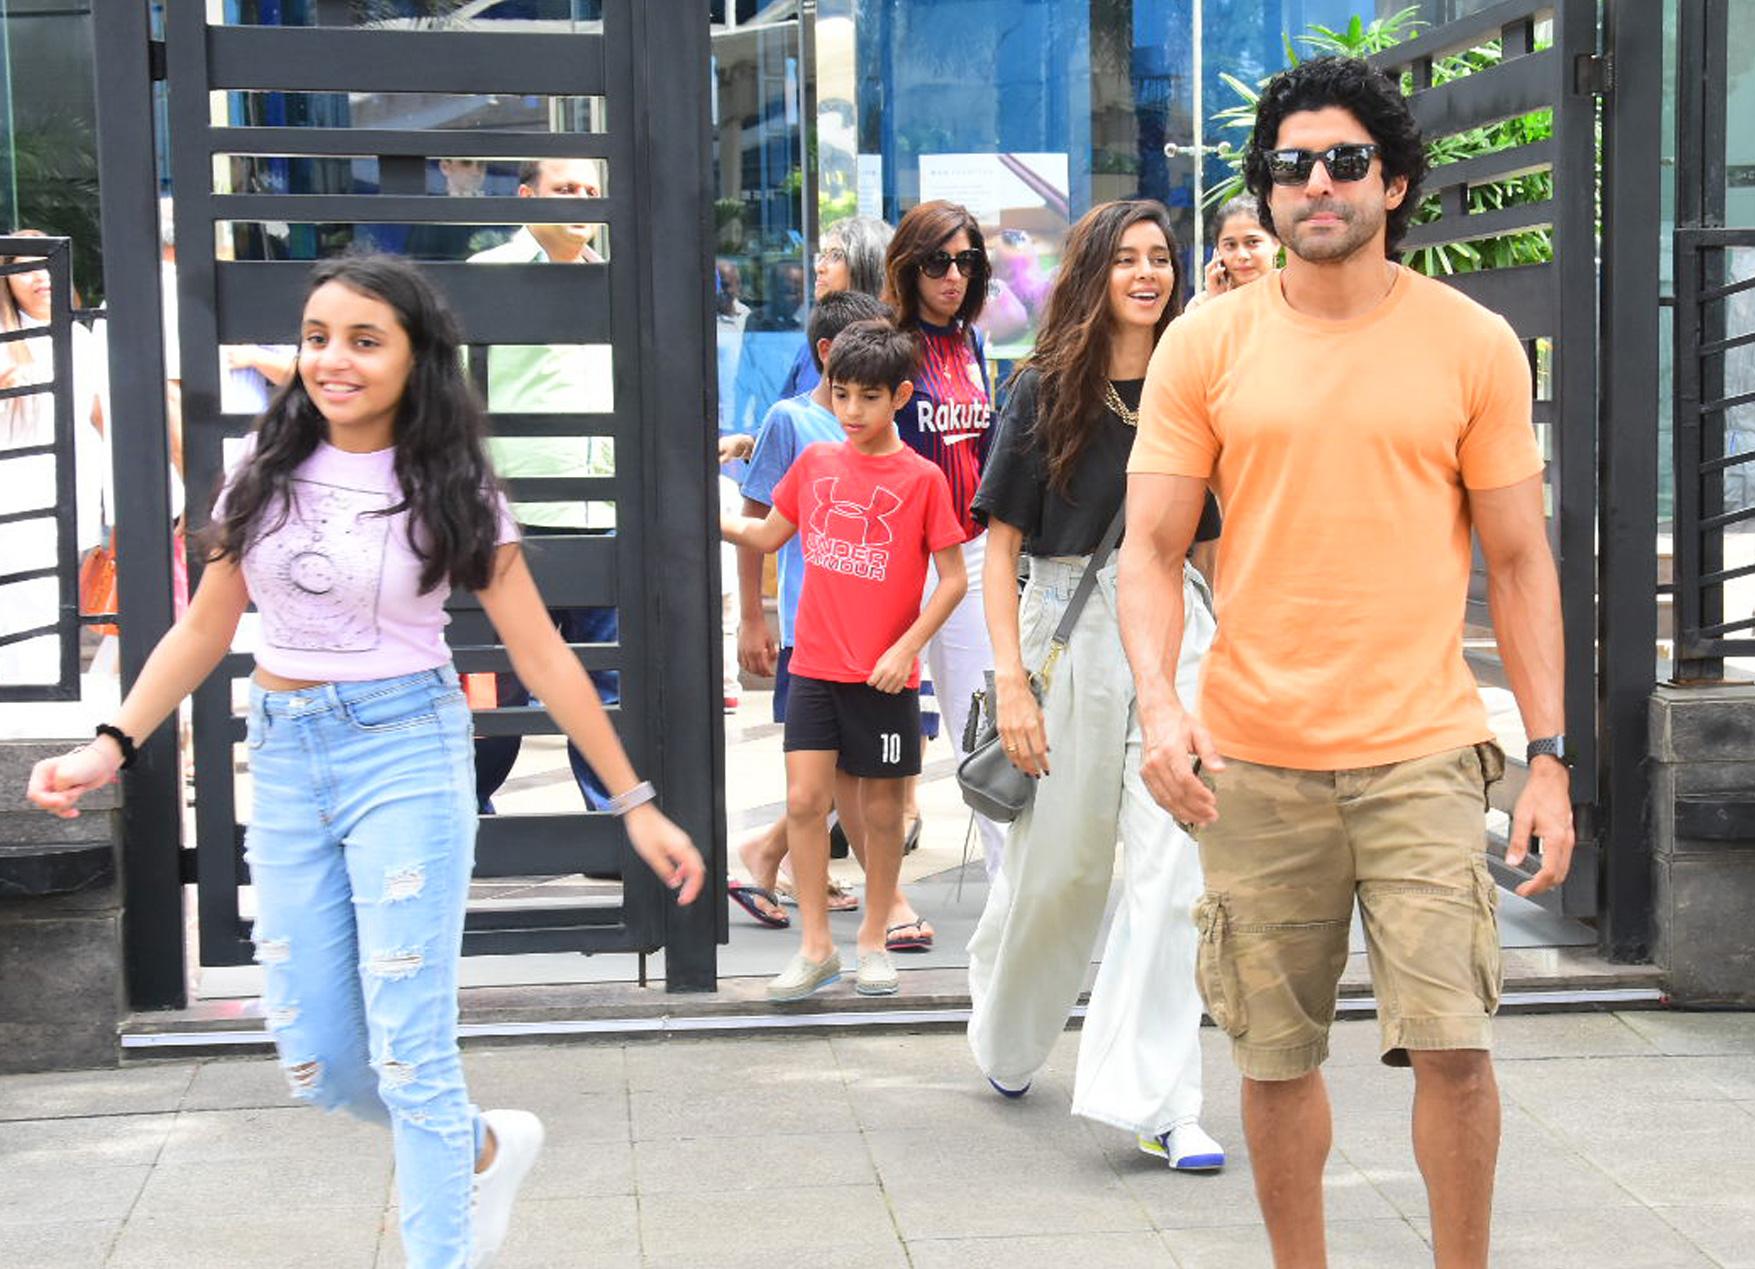 For the outing, Farhan opted for an orange-coloured t-shirt and shorts, while beau Shibani was dressed sported a black top and cream coloured pants. On the other hand, Shakya donned mauve coloured crop top and ripped jeans, while her younger sister opted for a hot pink top and shorts.